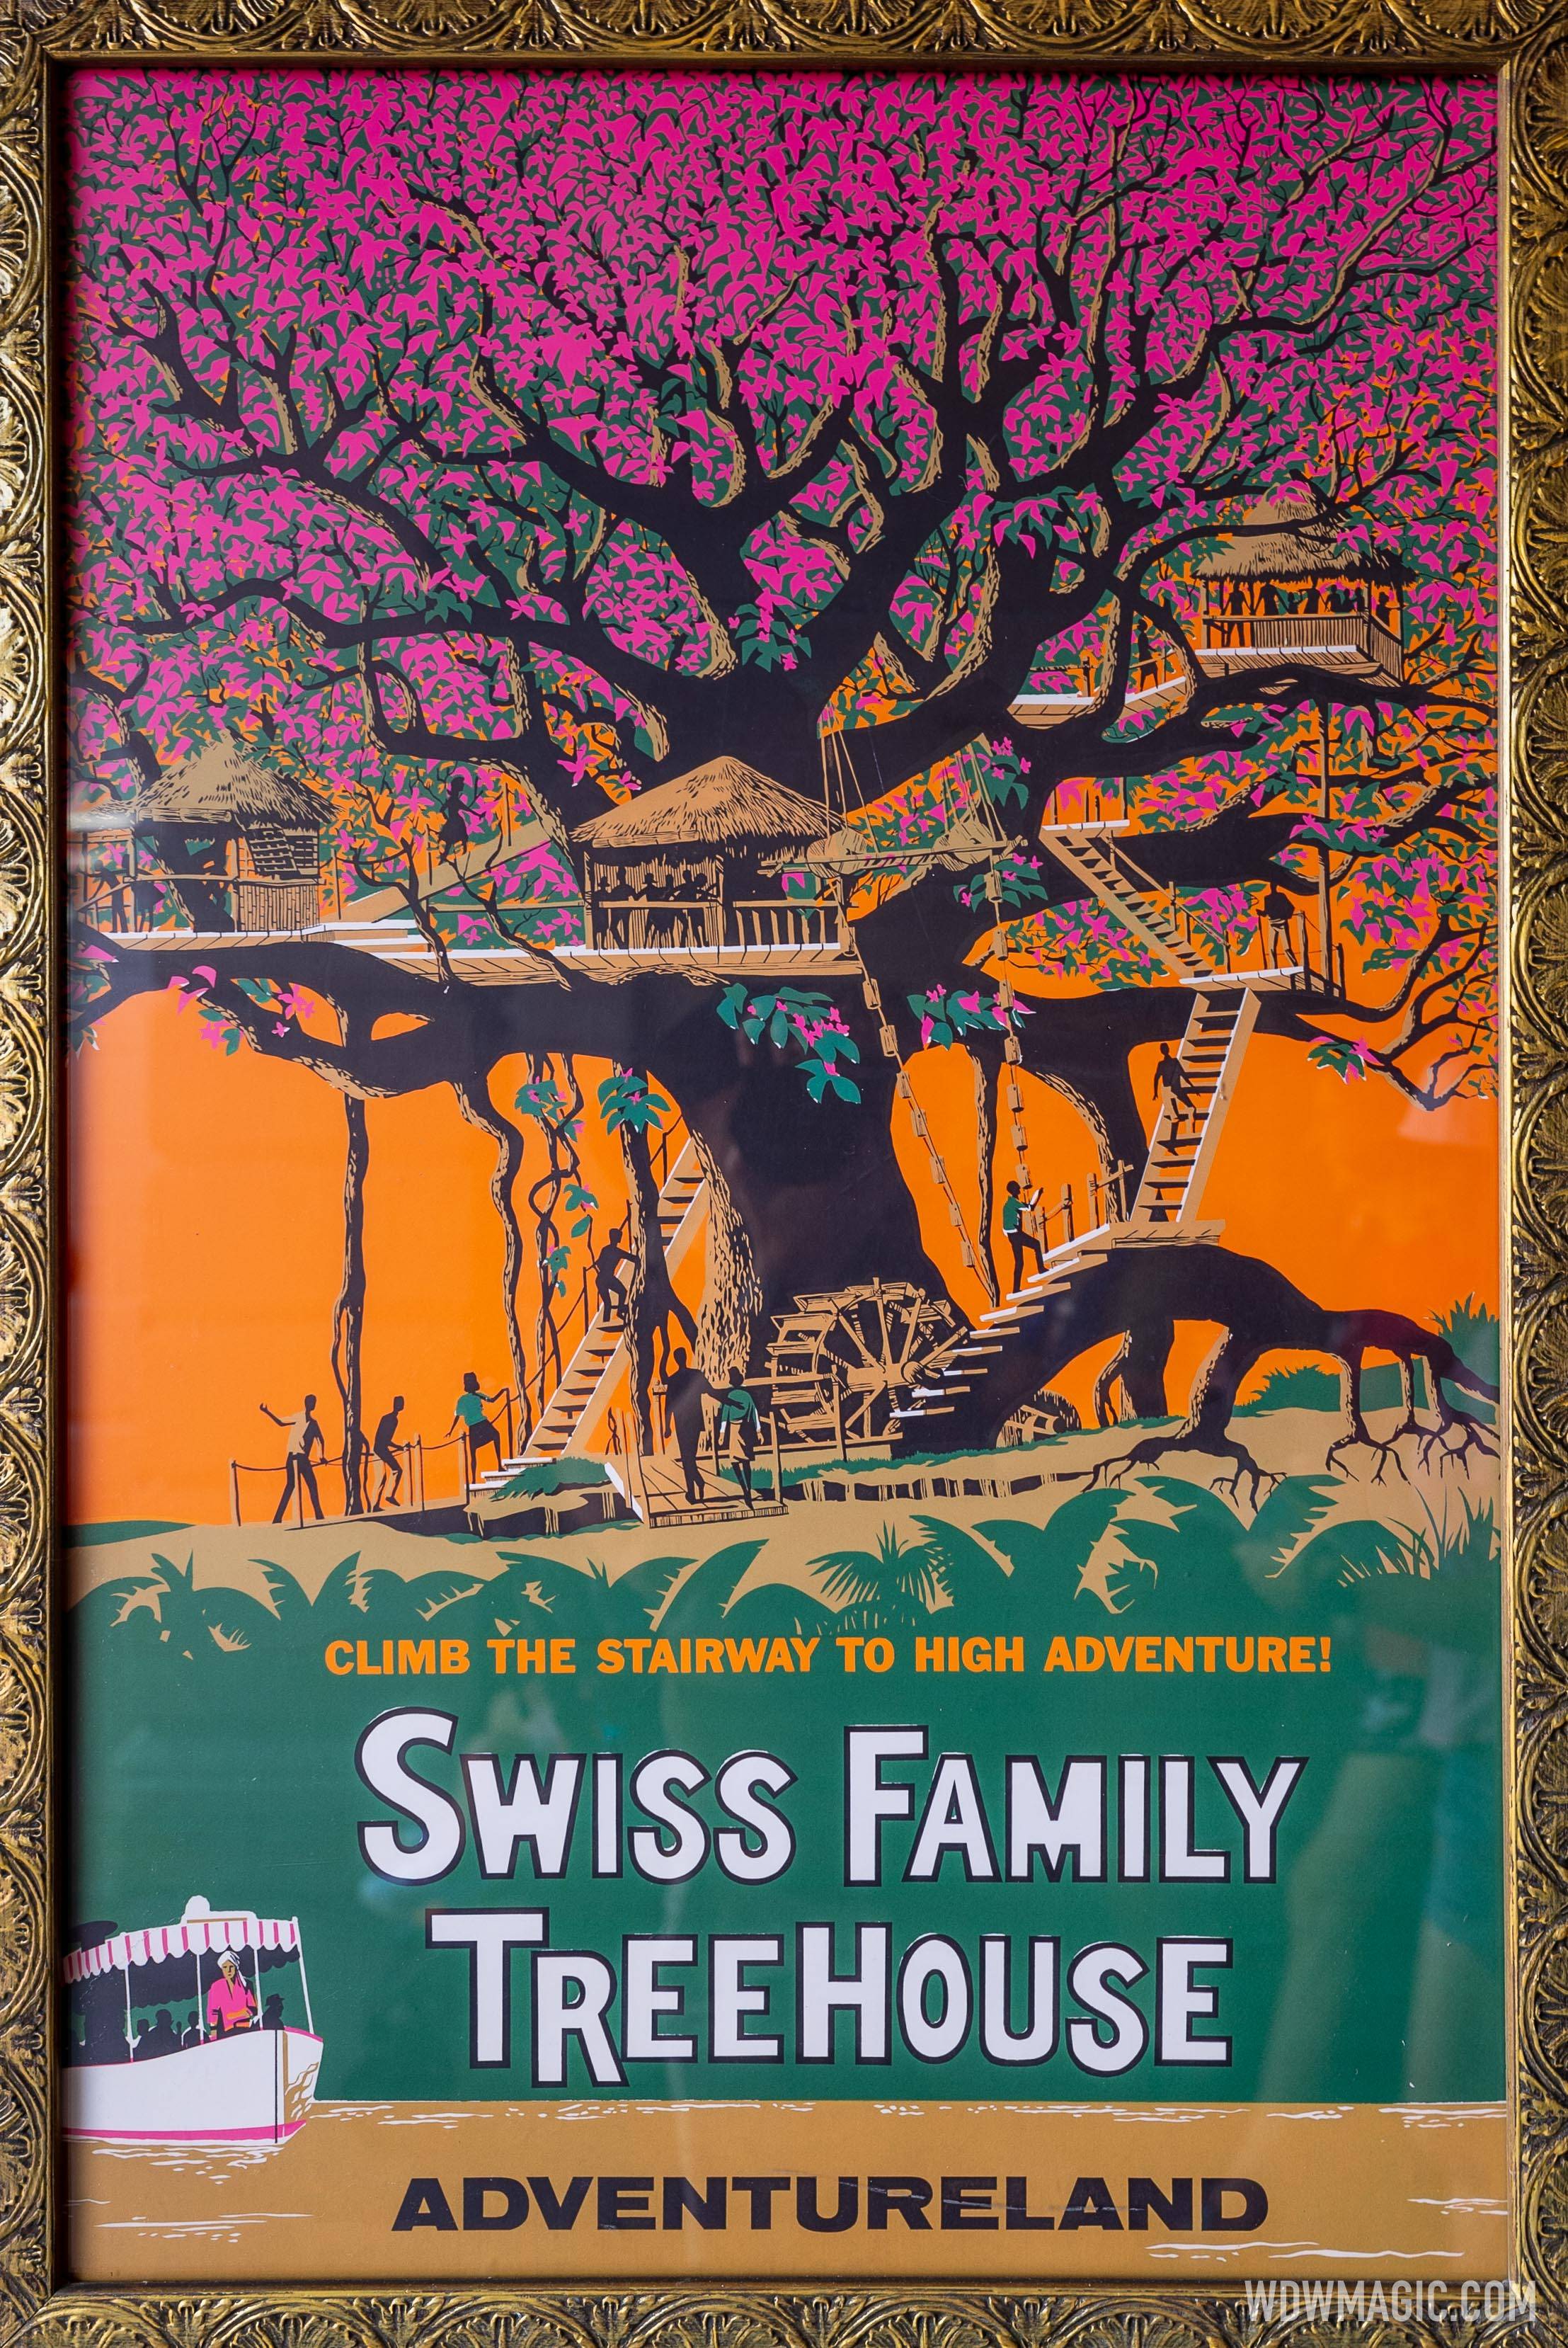 Magic Kingdom vintage attraction poster - Swiss Family Treehouse